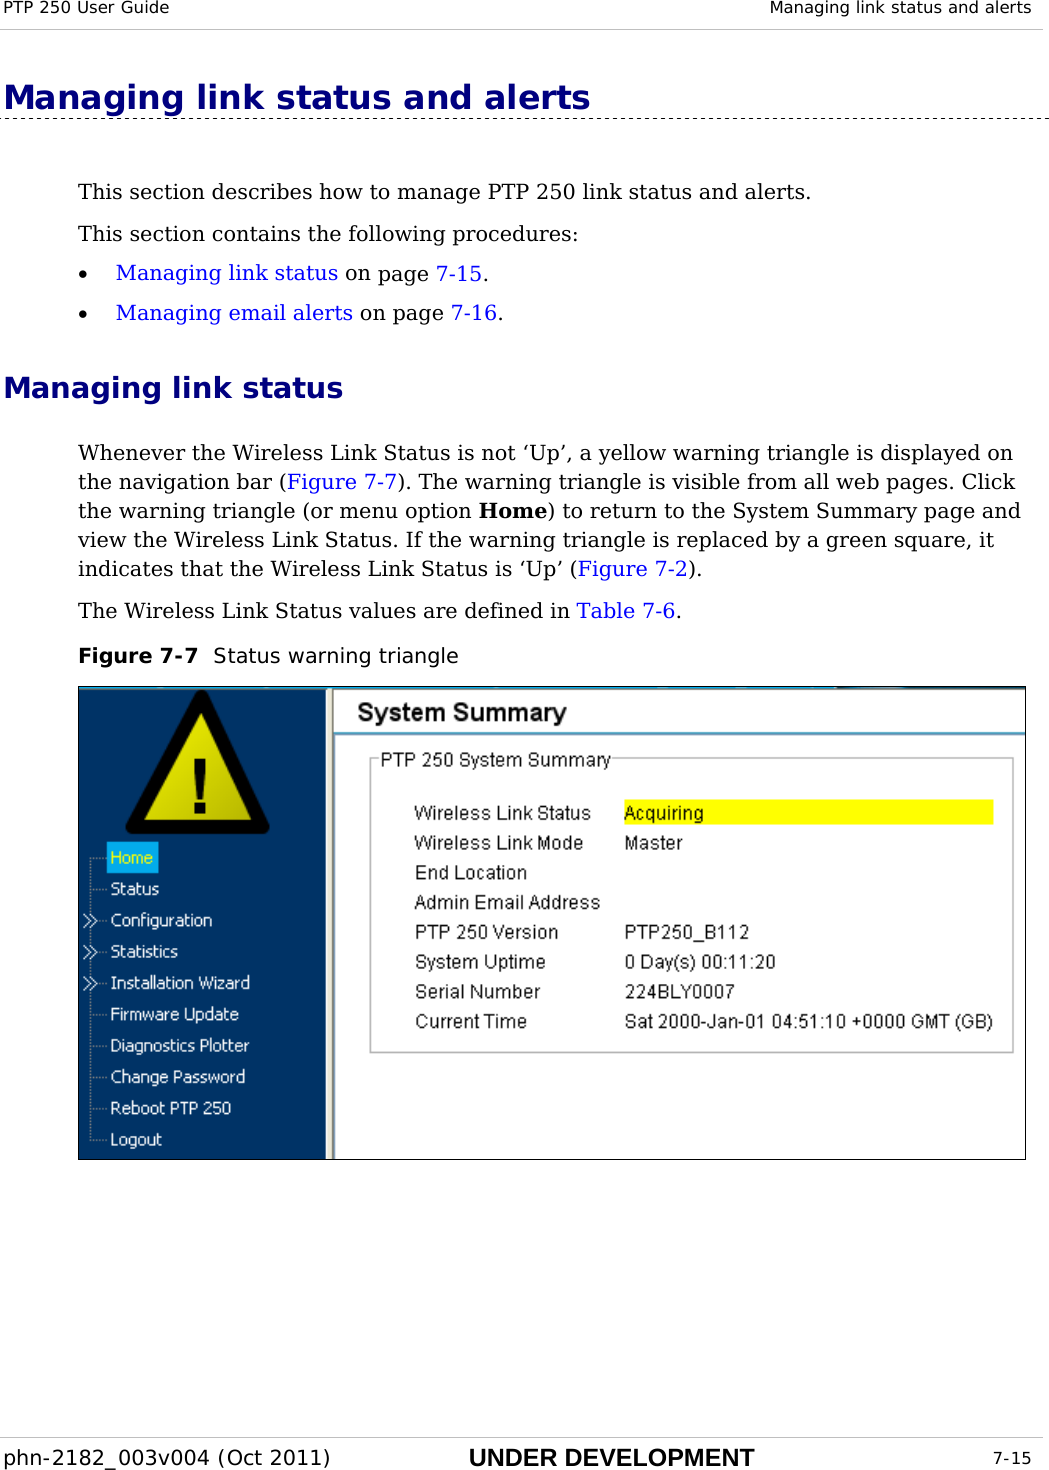 PTP 250 User Guide  Managing link status and alerts  phn-2182_003v004 (Oct 2011)  UNDER DEVELOPMENT  7-15  Managing link status and alerts This section describes how to manage PTP 250 link status and alerts. This section contains the following procedures: • Managing link status on page 7-15. • Managing email alerts on page 7-16. Managing link status Whenever the Wireless Link Status is not ‘Up’, a yellow warning triangle is displayed on the navigation bar (Figure 7-7). The warning triangle is visible from all web pages. Click the warning triangle (or menu option Home) to return to the System Summary page and view the Wireless Link Status. If the warning triangle is replaced by a green square, it indicates that the Wireless Link Status is ‘Up’ (Figure 7-2). The Wireless Link Status values are defined in Table 7-6. Figure 7-7  Status warning triangle  